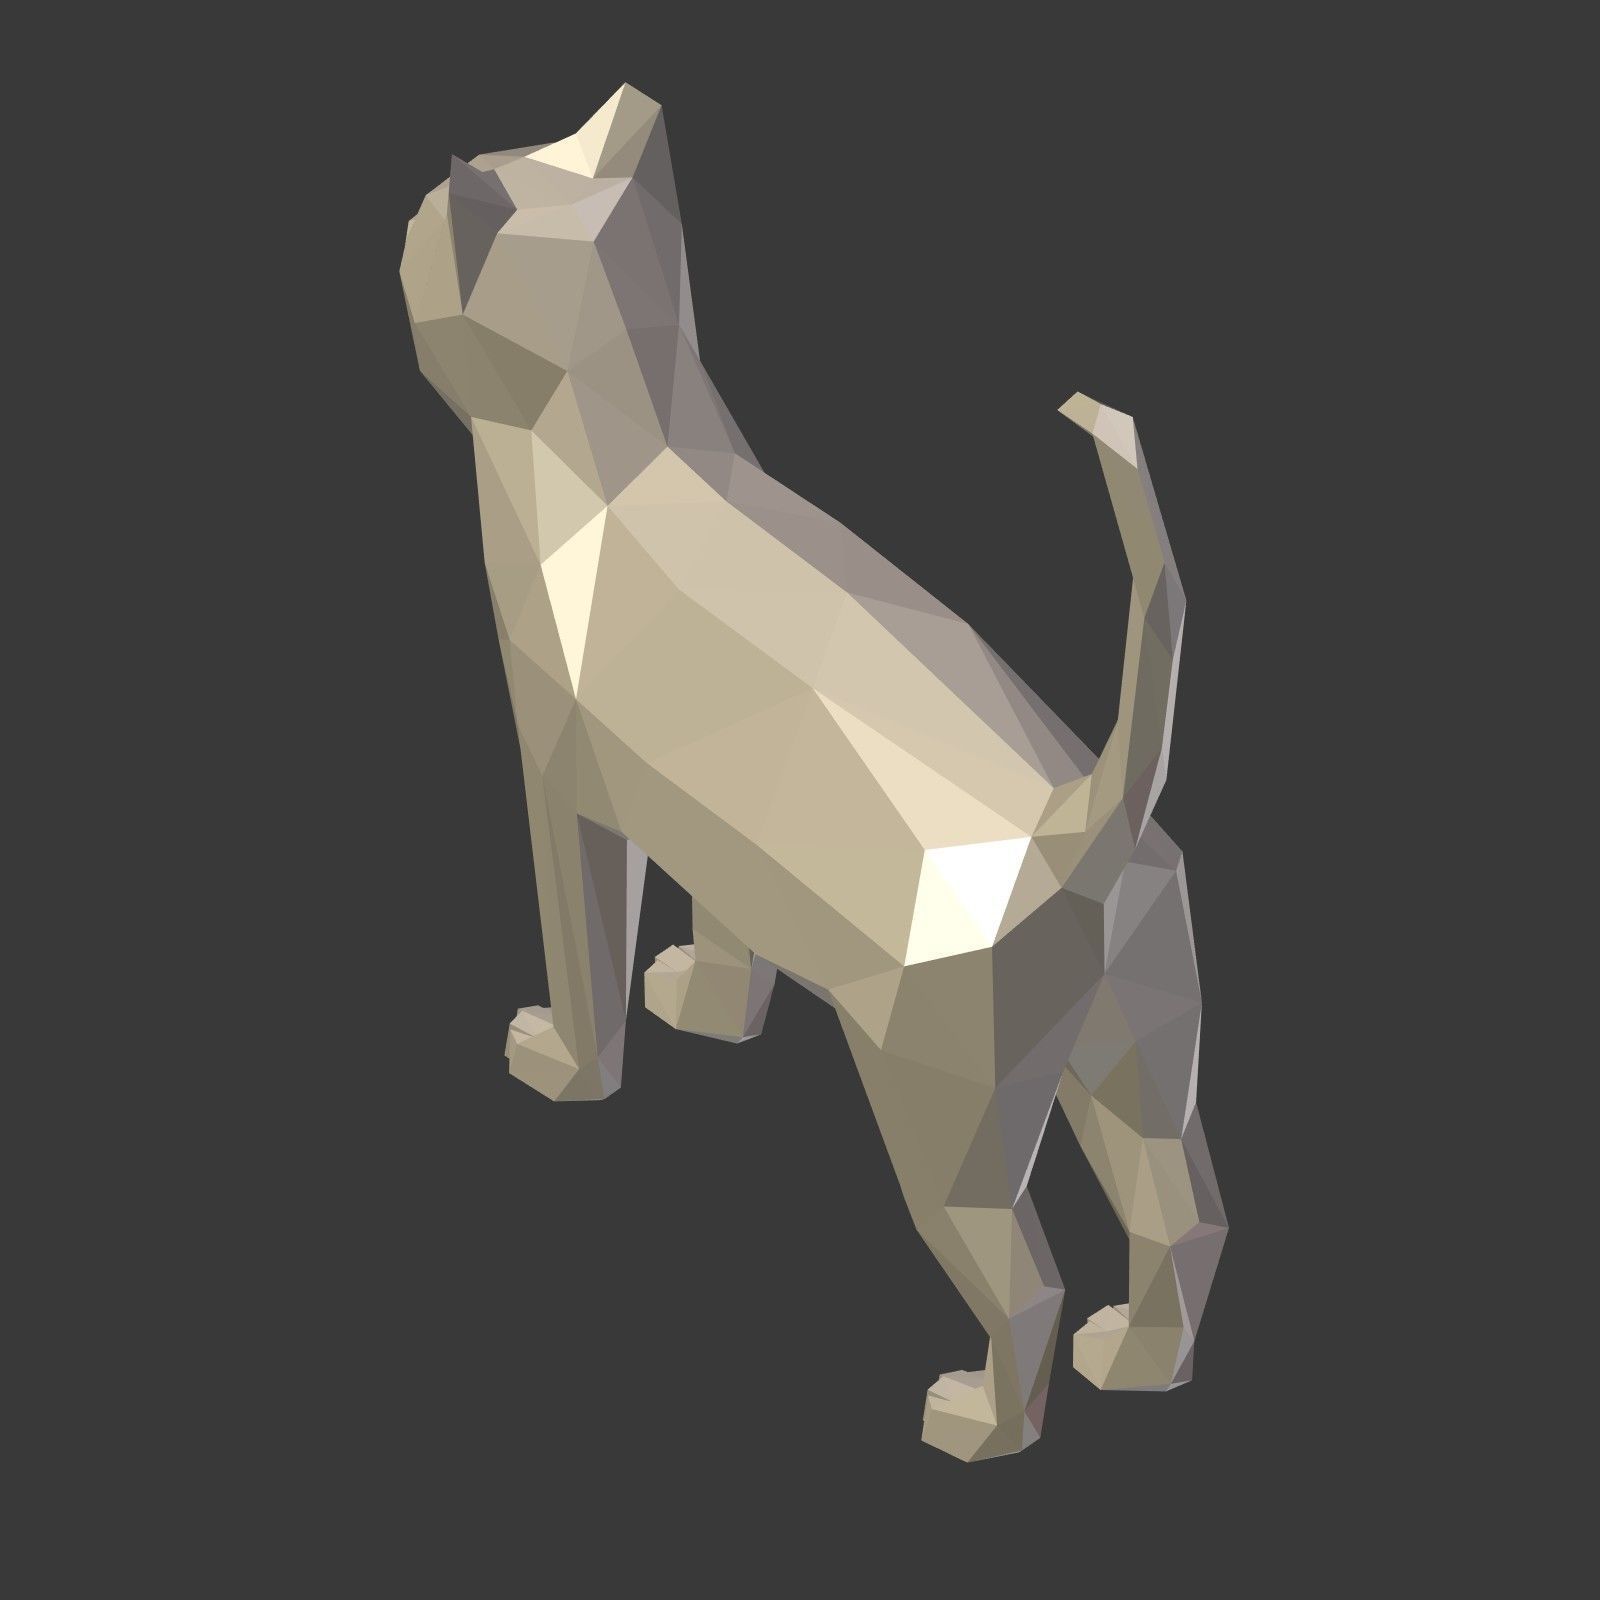 Low Poly Cartoon Cat Model 3D Download For Free